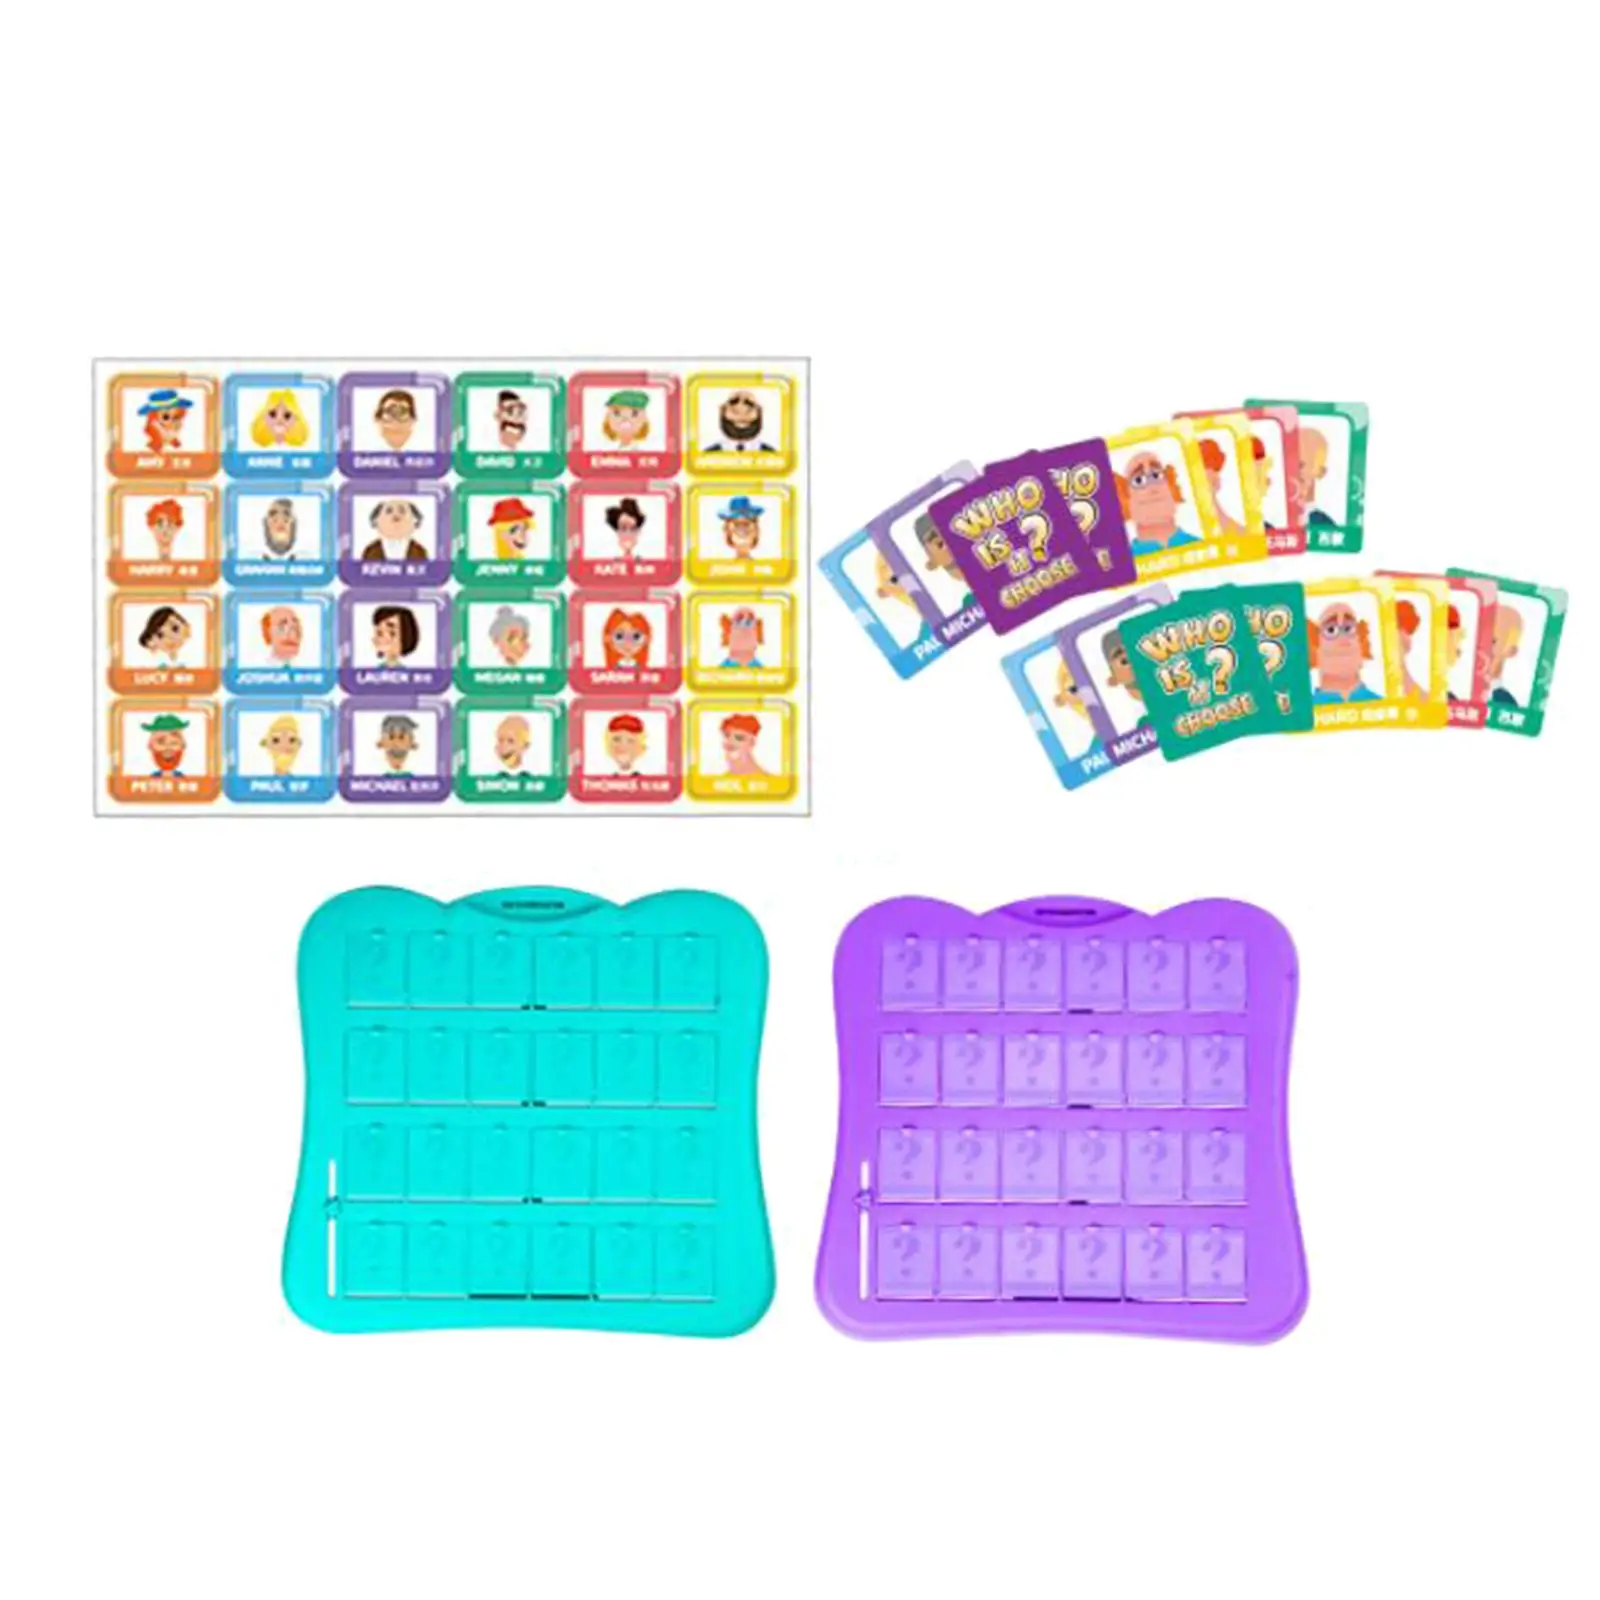 Guessing Who Game Novelty Interactive Puzzle Game Battle Game 2 Players for Girls Party Prop Travel Games Family Game Boys